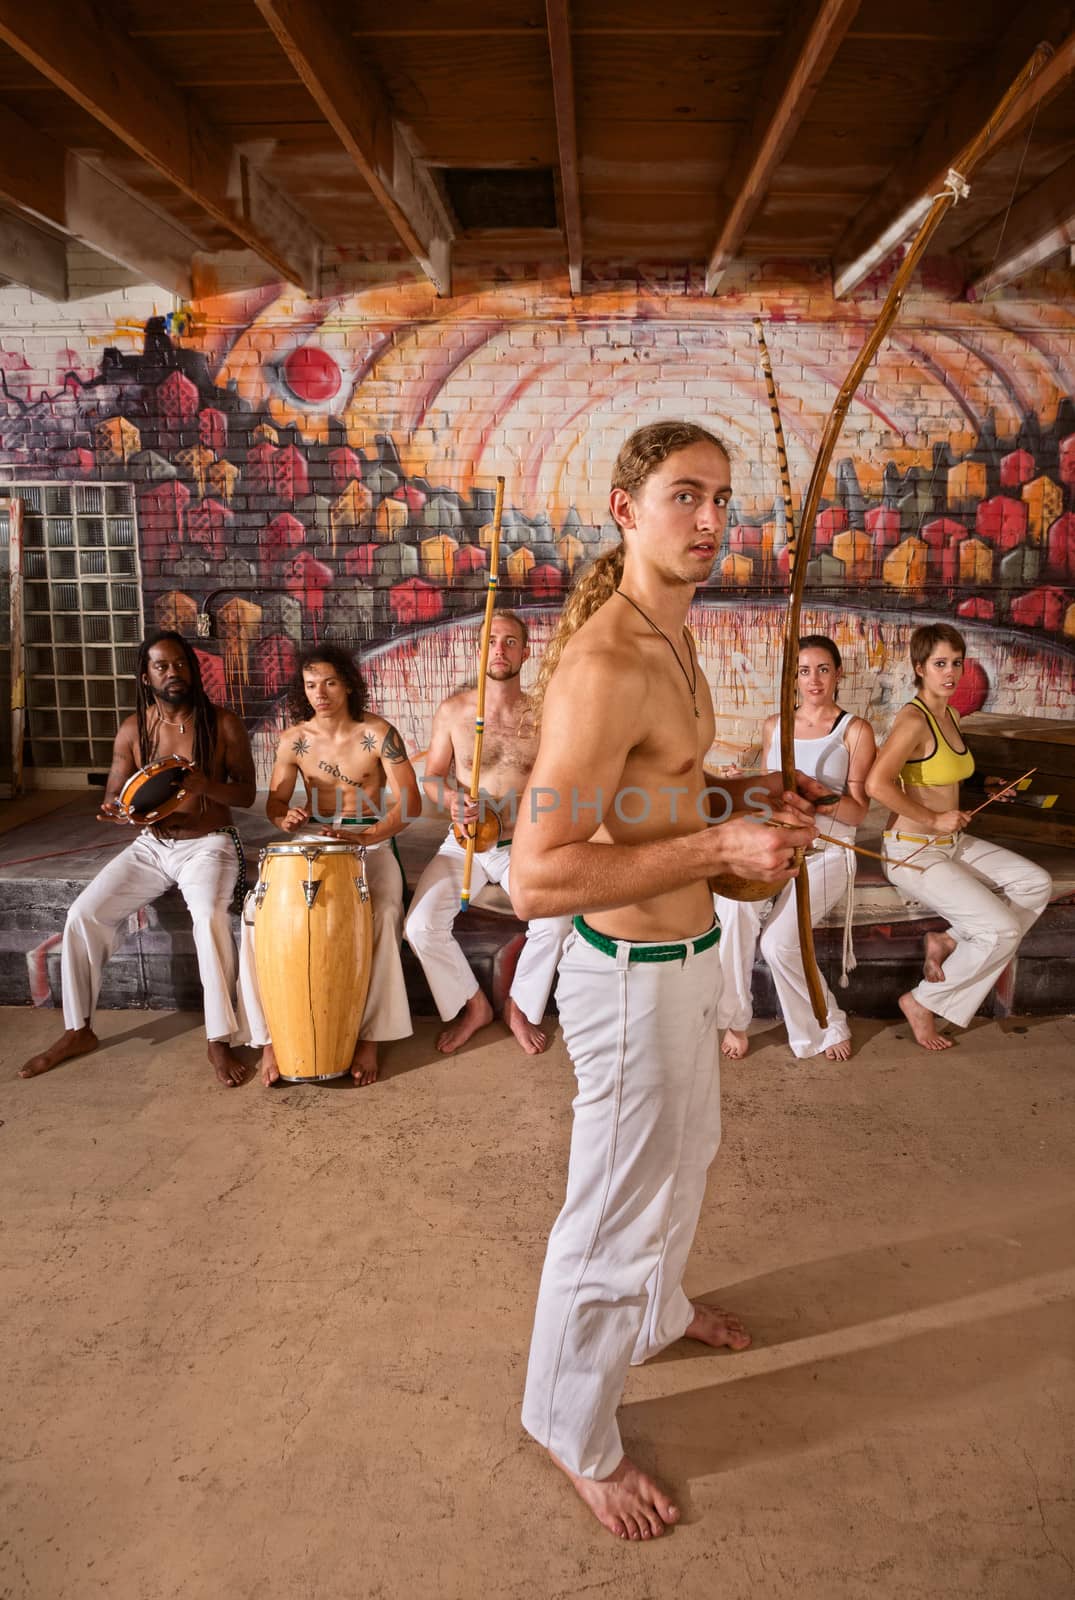 Group of 6 traditional Capoeira performers in urban building